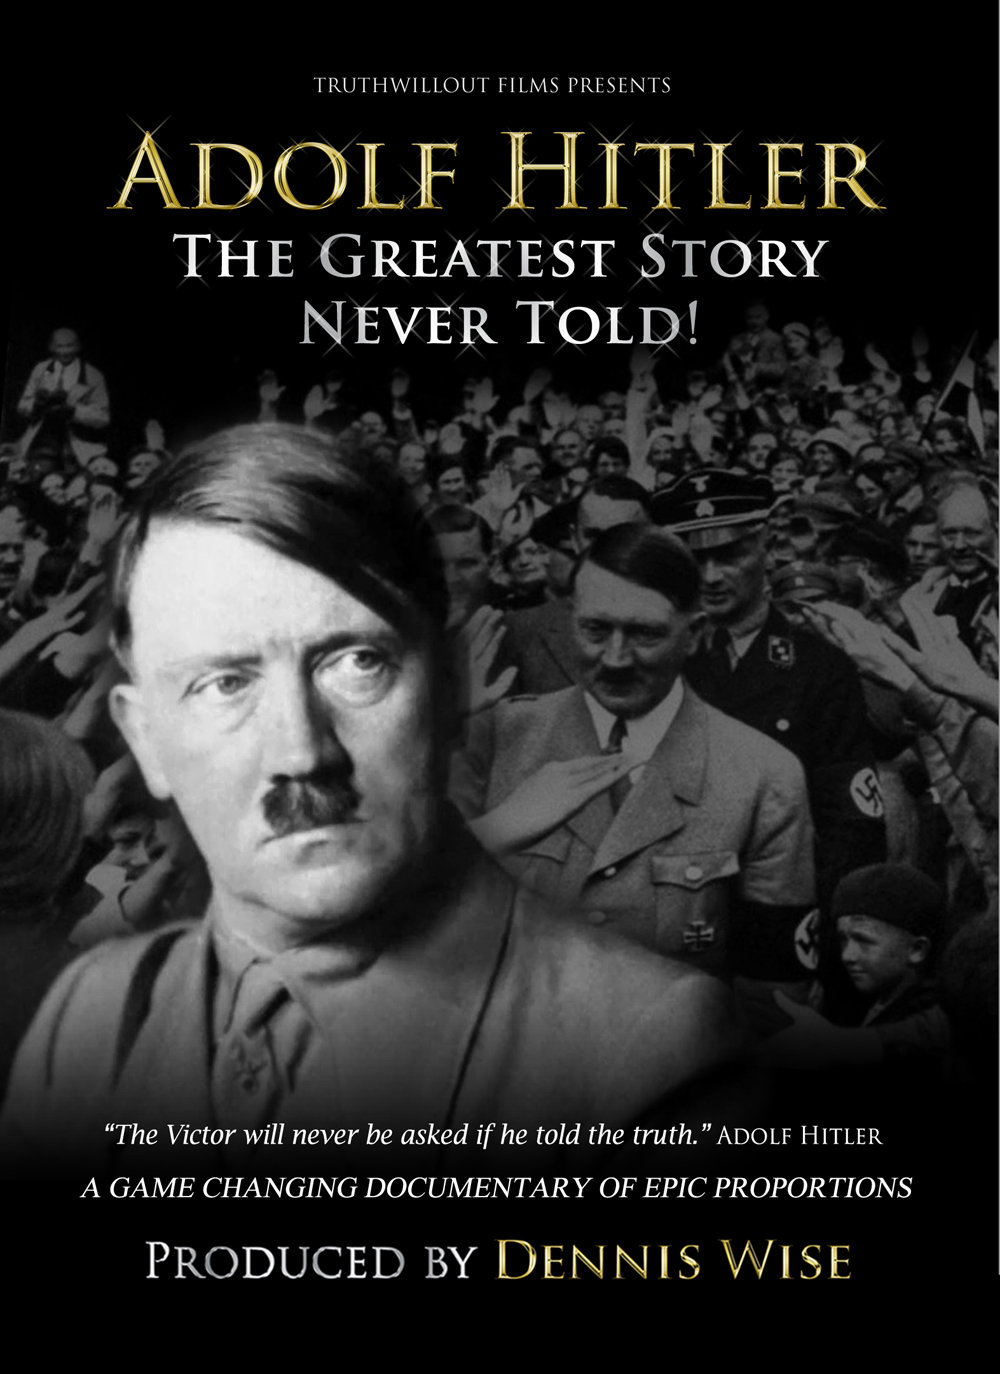 Adolf Hitler: The Greatest Story Never Told (2013) Screenshot 1 